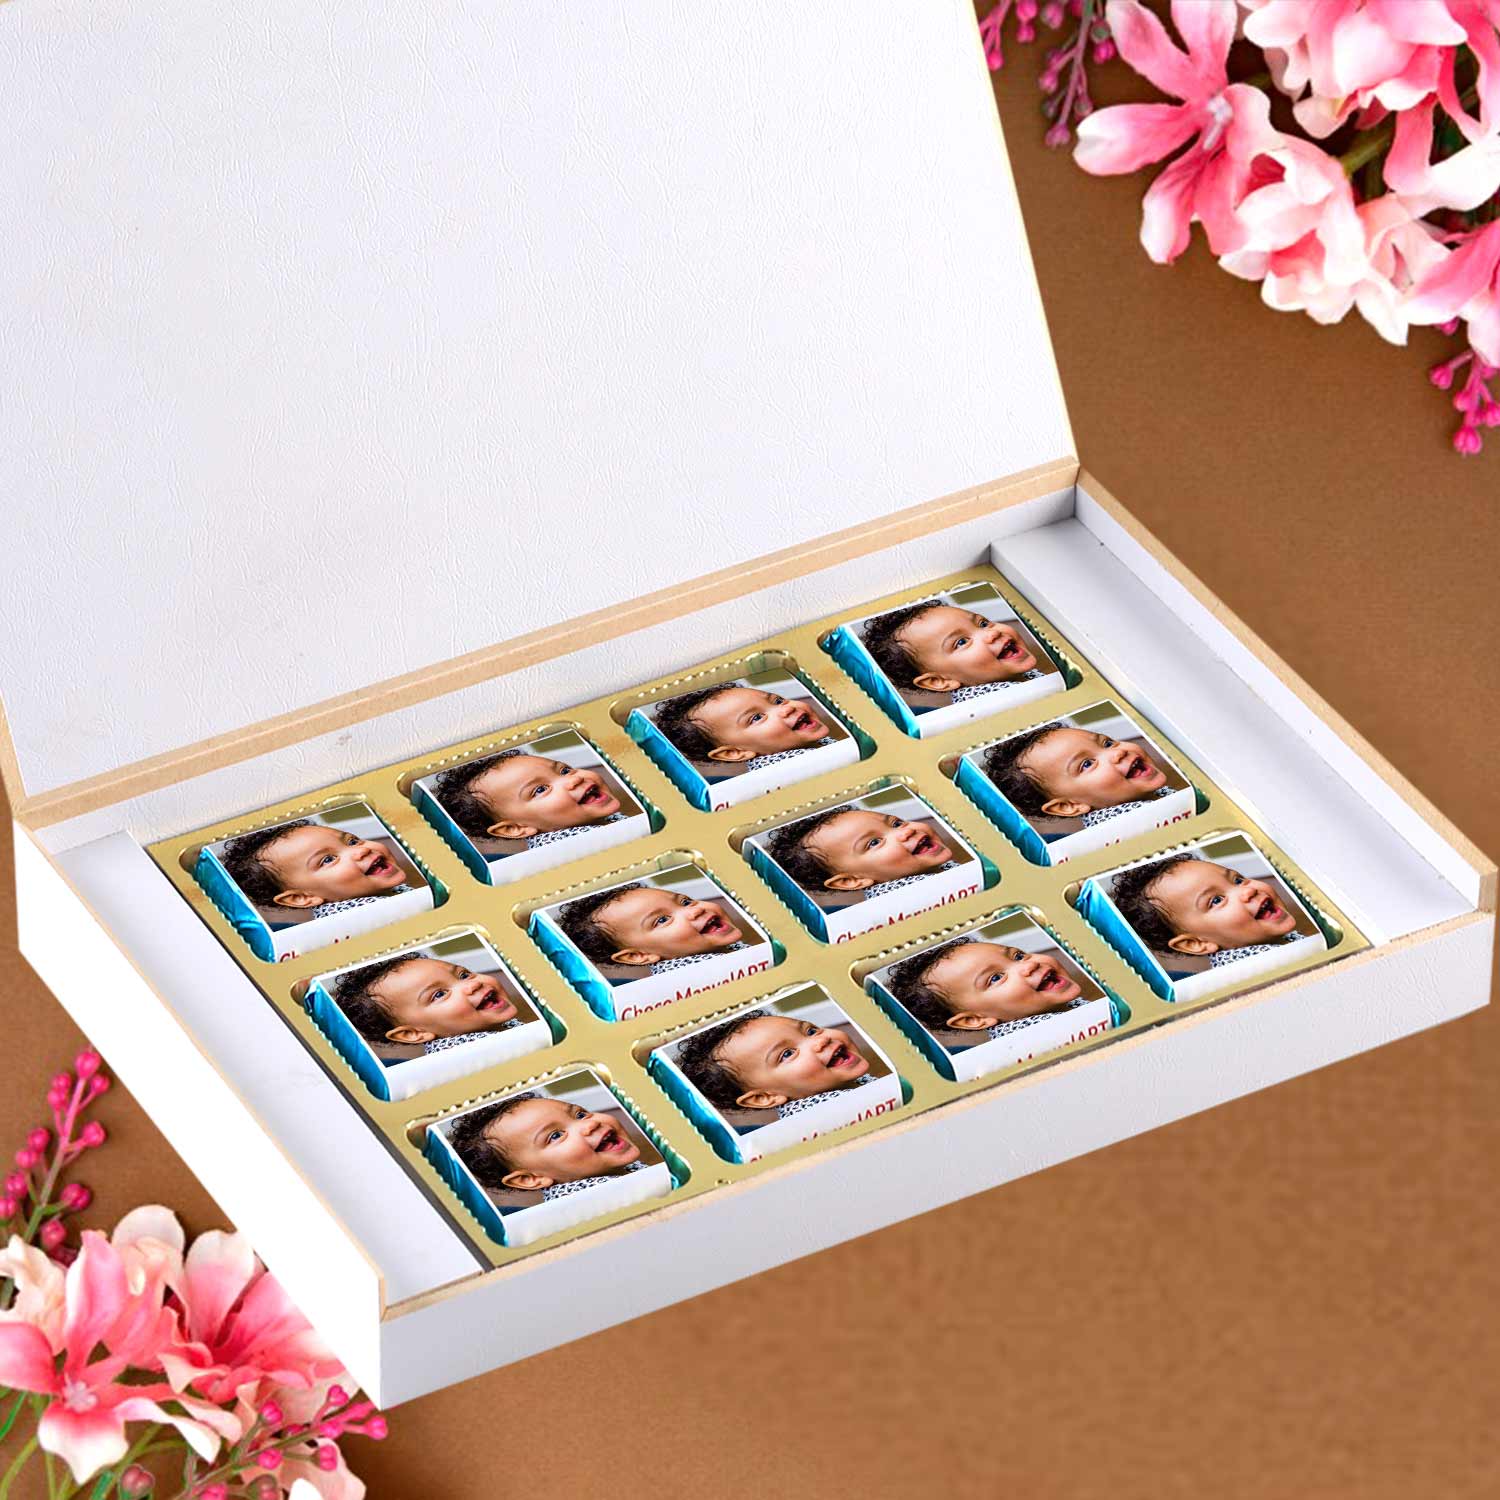 customized white wooden box with a wrapper of all-printed chocolates. There is also a personalized message printed on Message paper inside the box.